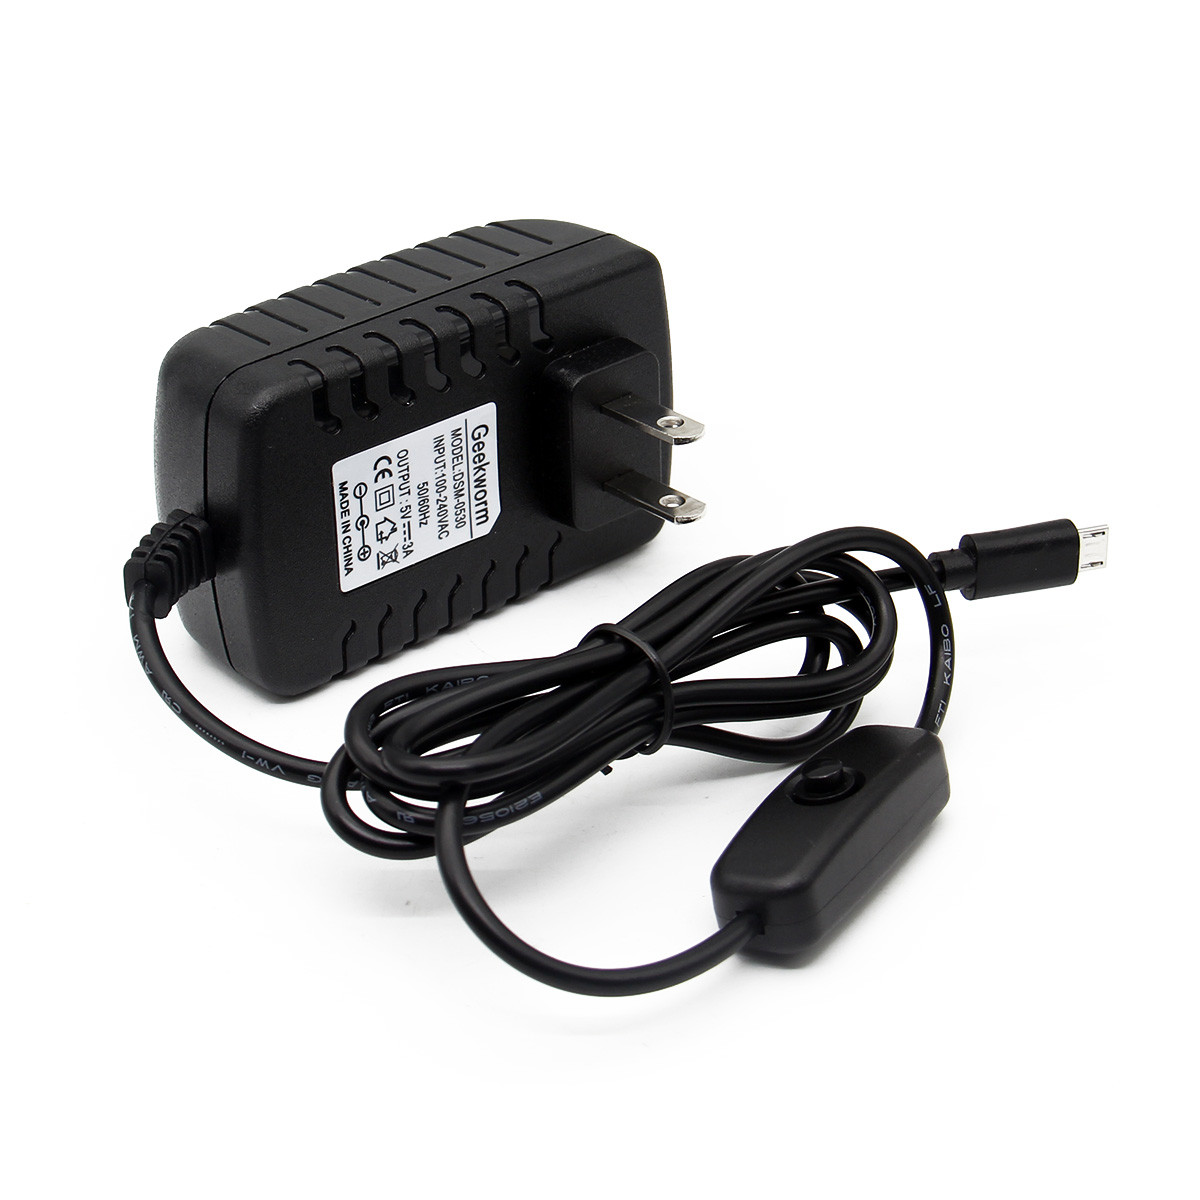 Geekworm US Standard DC 5V 3.0A Power Supply Adapter with Switch For Raspberry Pi 7